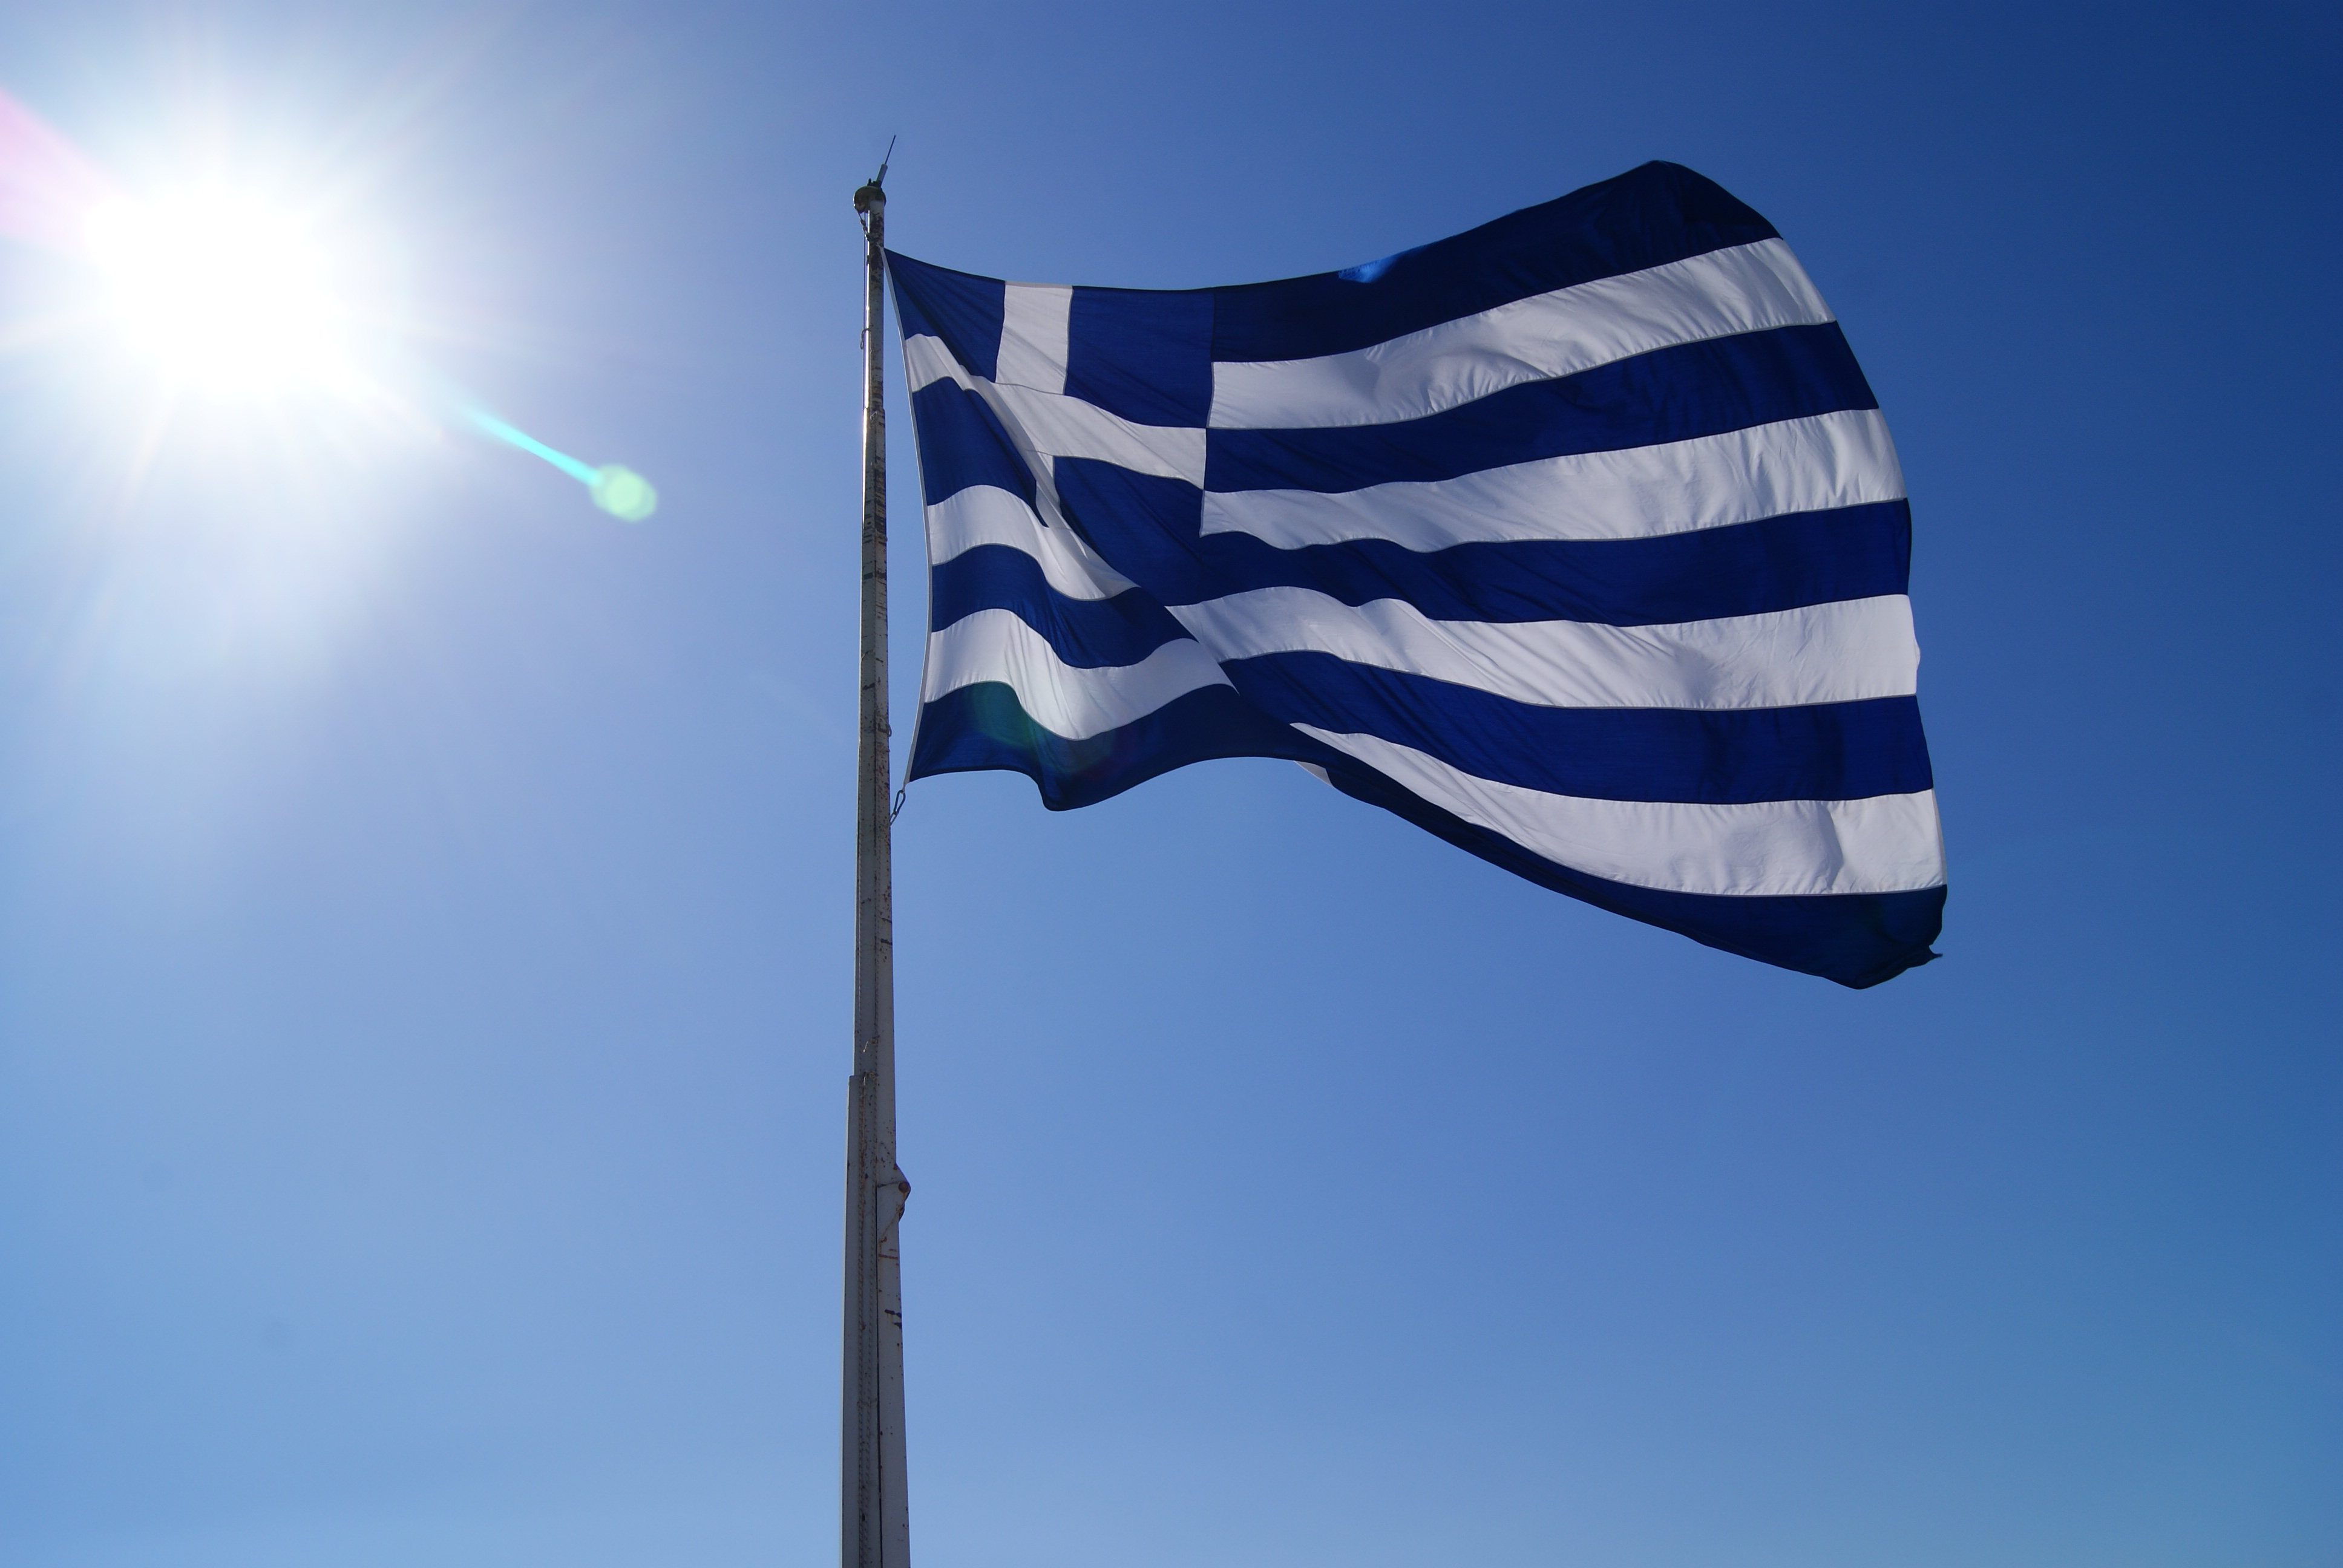 Greek Flag flowing in the wind image - Free stock photo ...